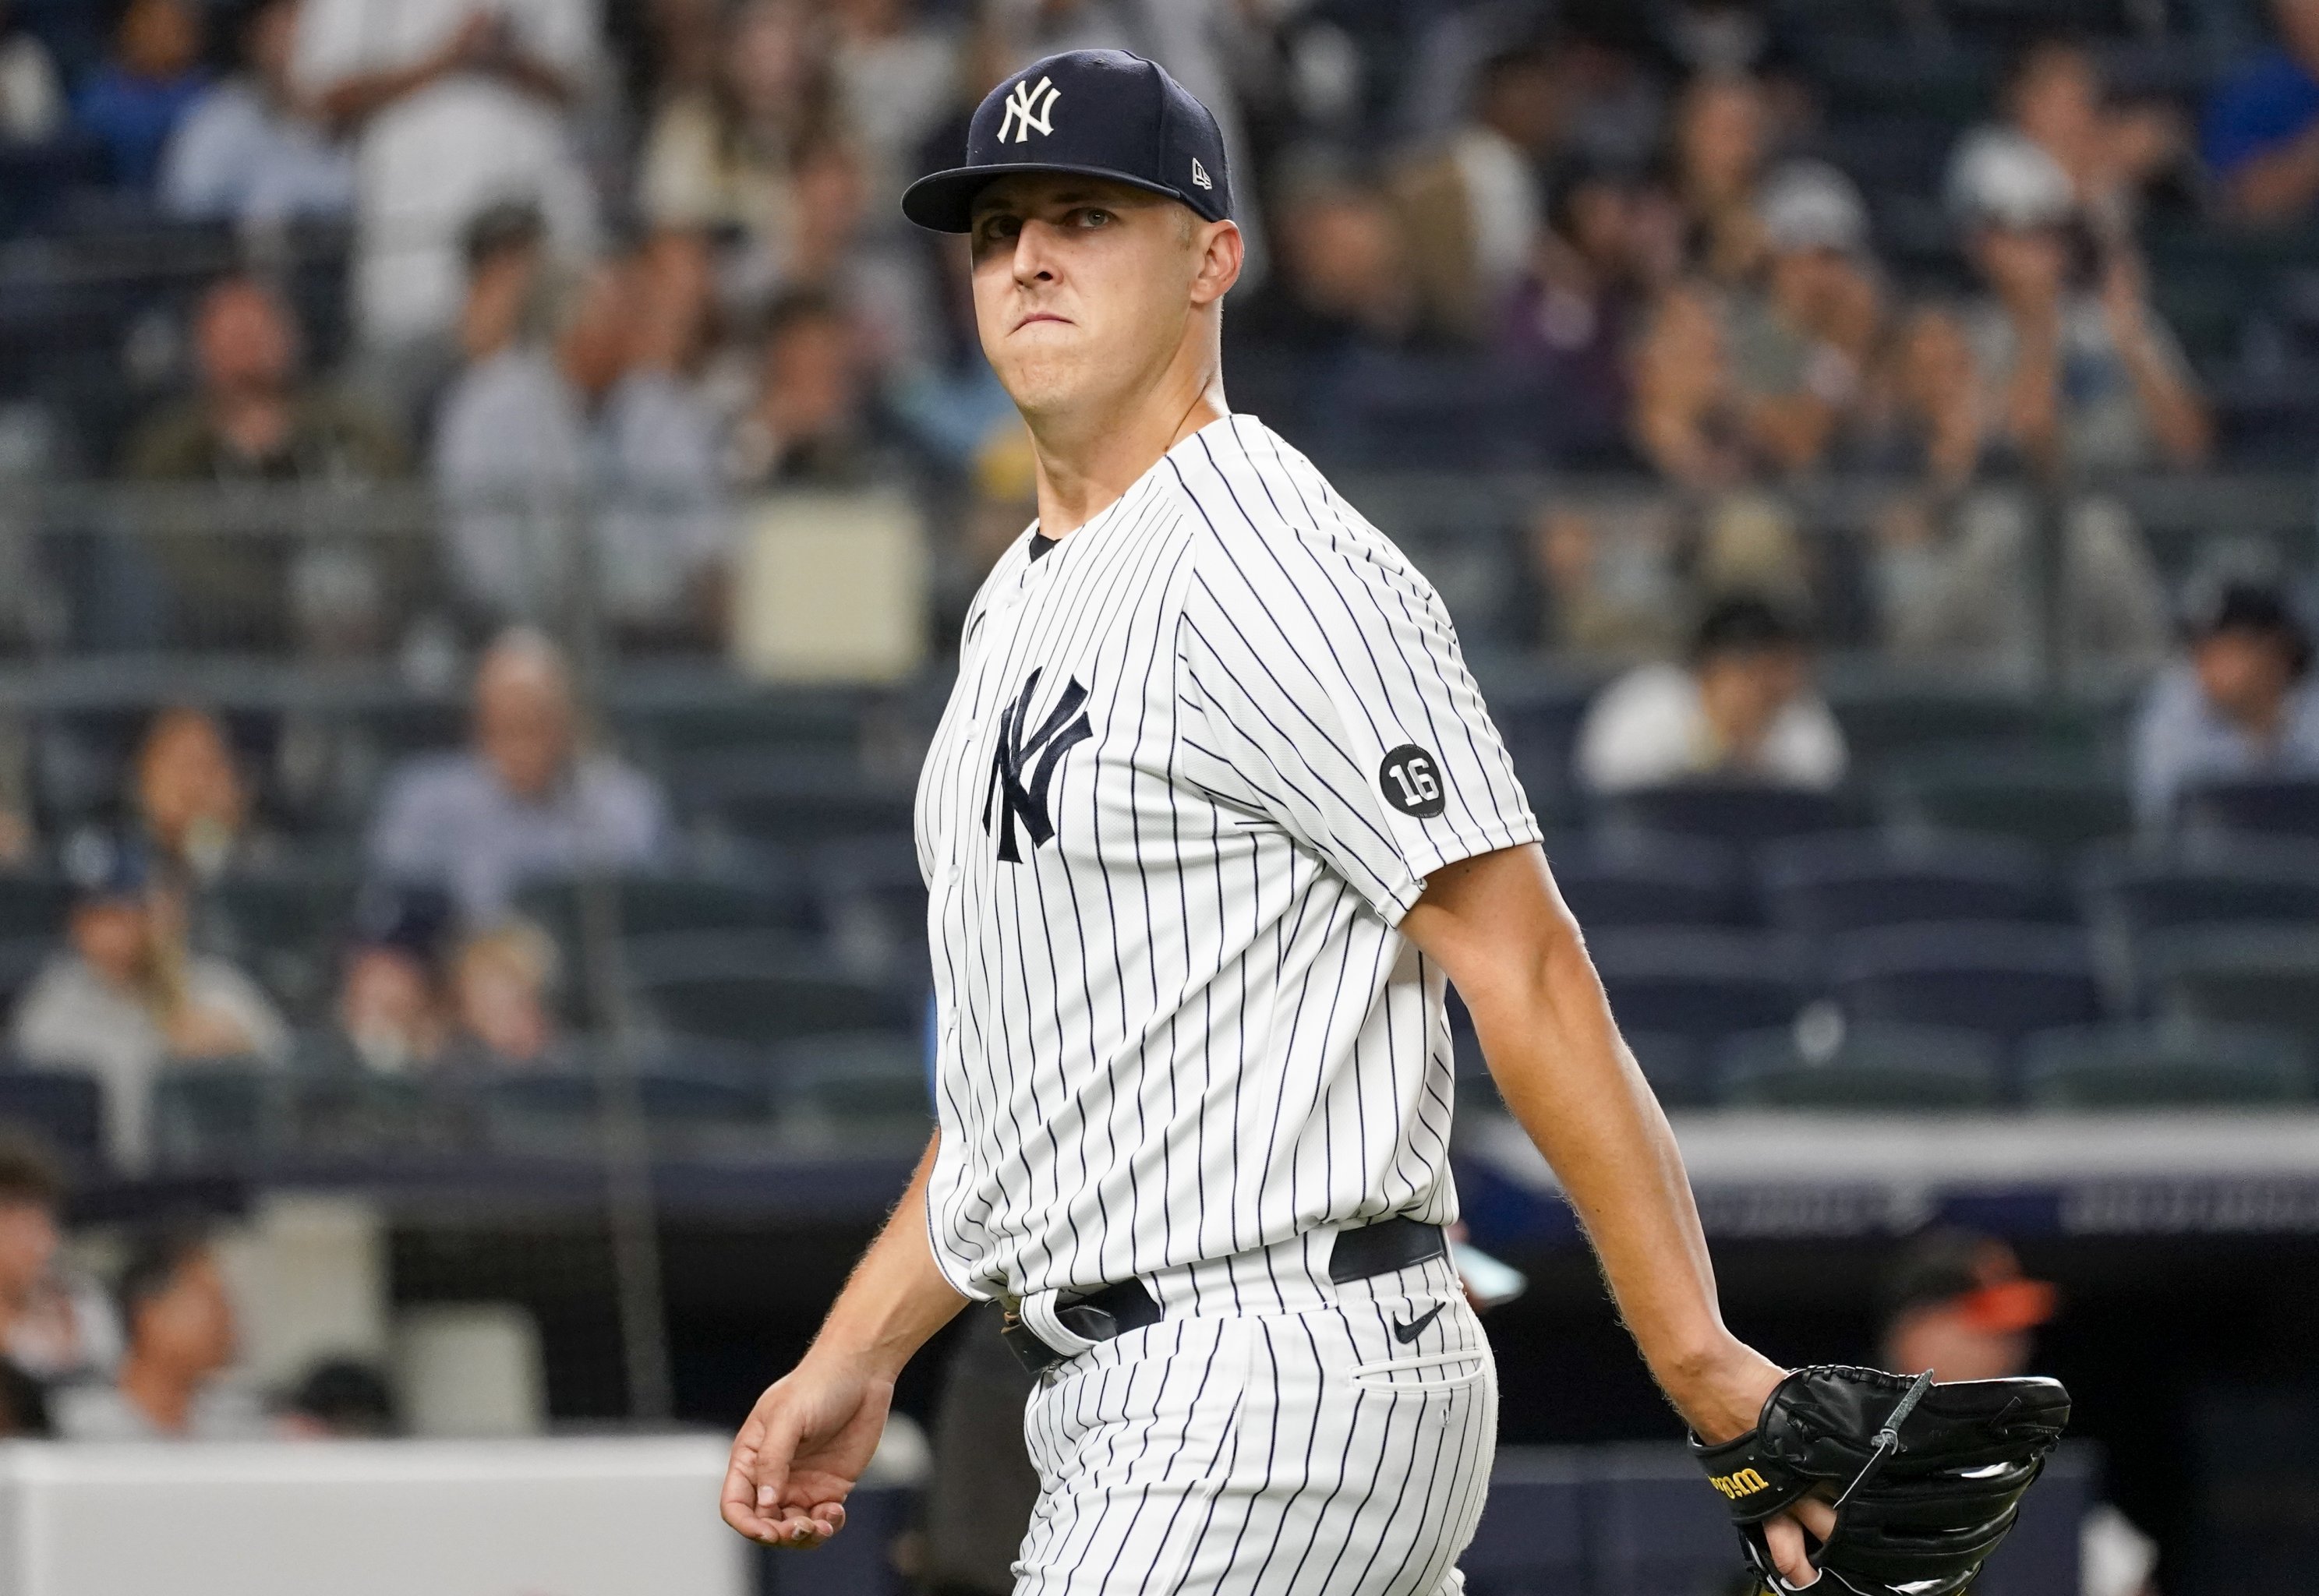 An Old Yankees Draft Pick Comes Back to Haunt Them - The New York